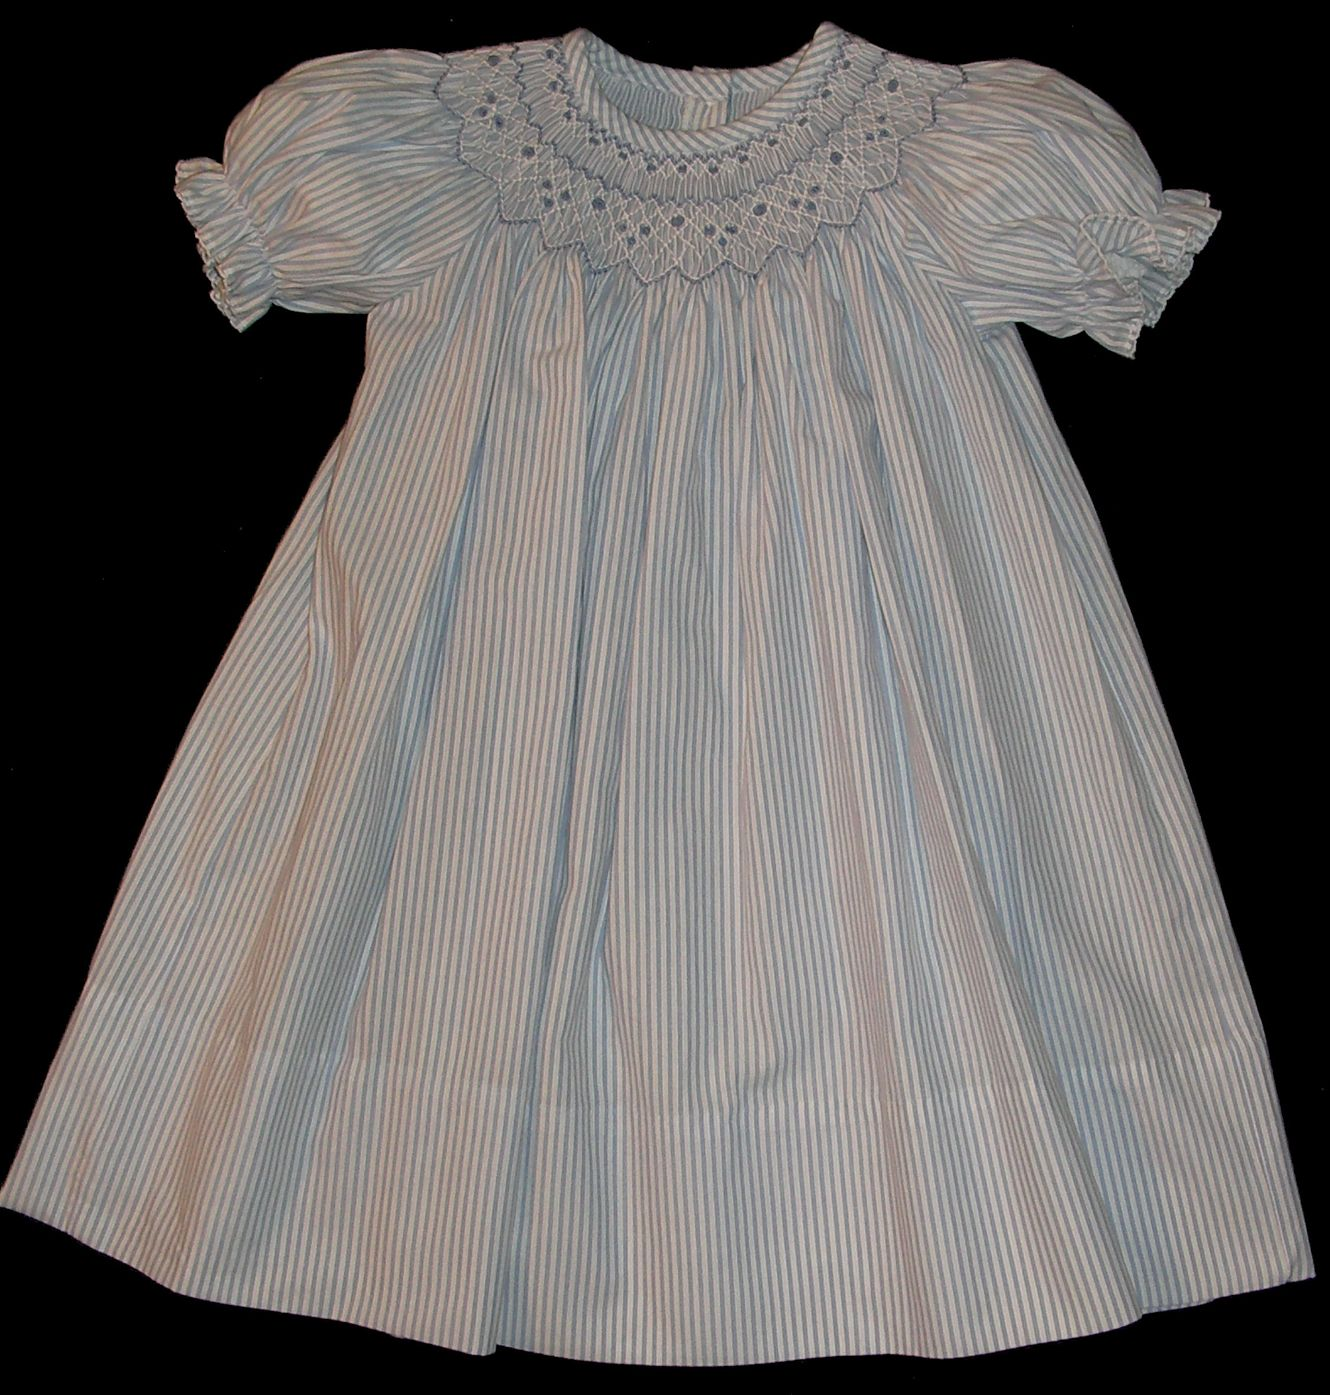 Bishop Blue Hand smocked dress - Nelly _ FREE Shipping Sz 12M to 8Y